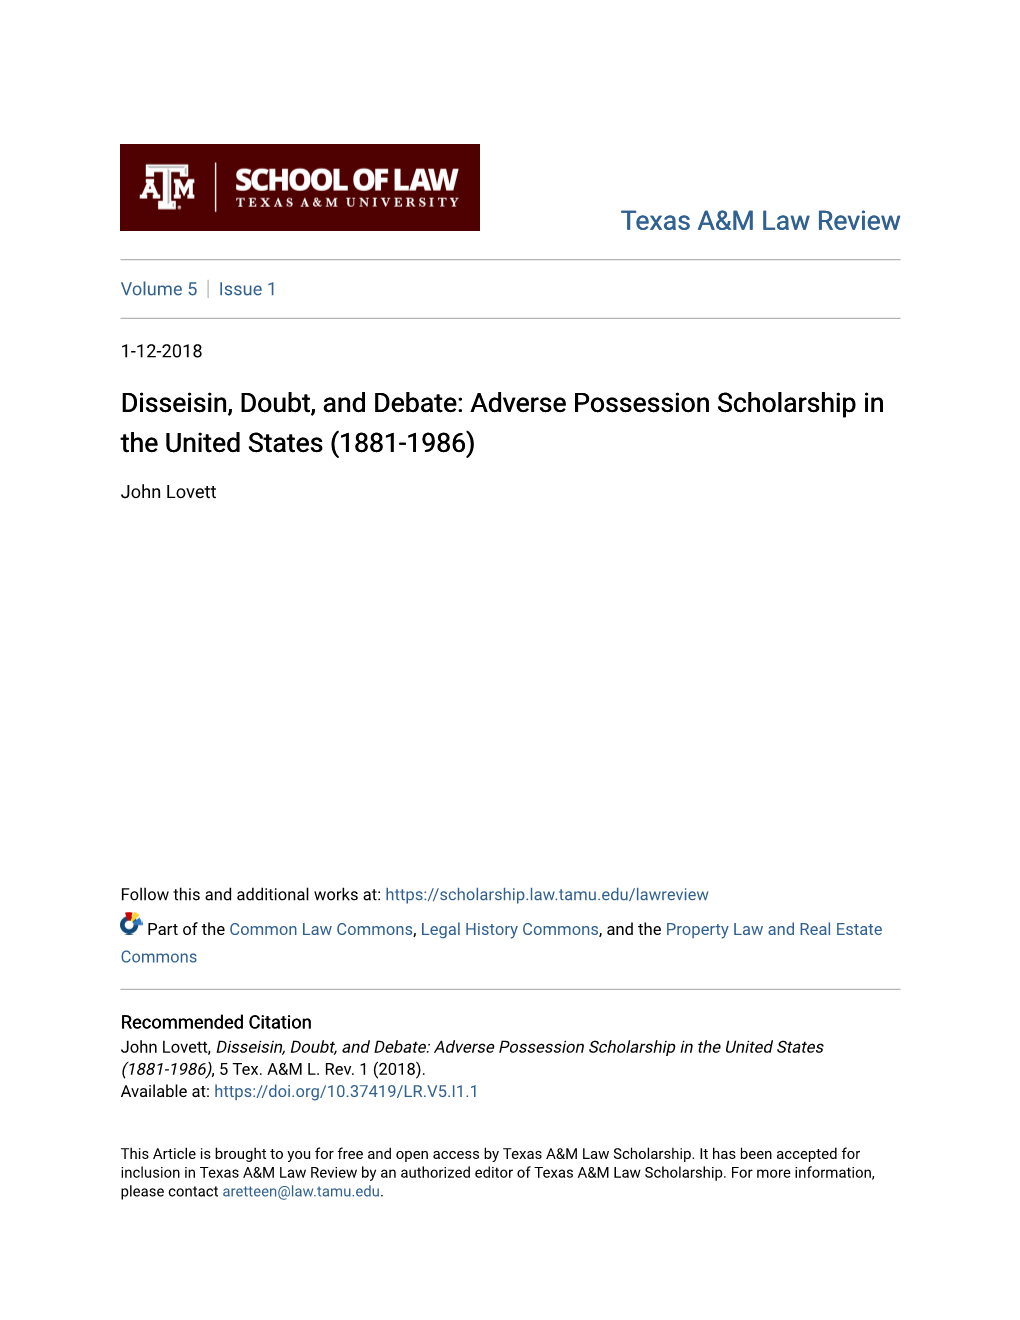 Disseisin, Doubt, and Debate: Adverse Possession Scholarship in the United States (1881-1986)